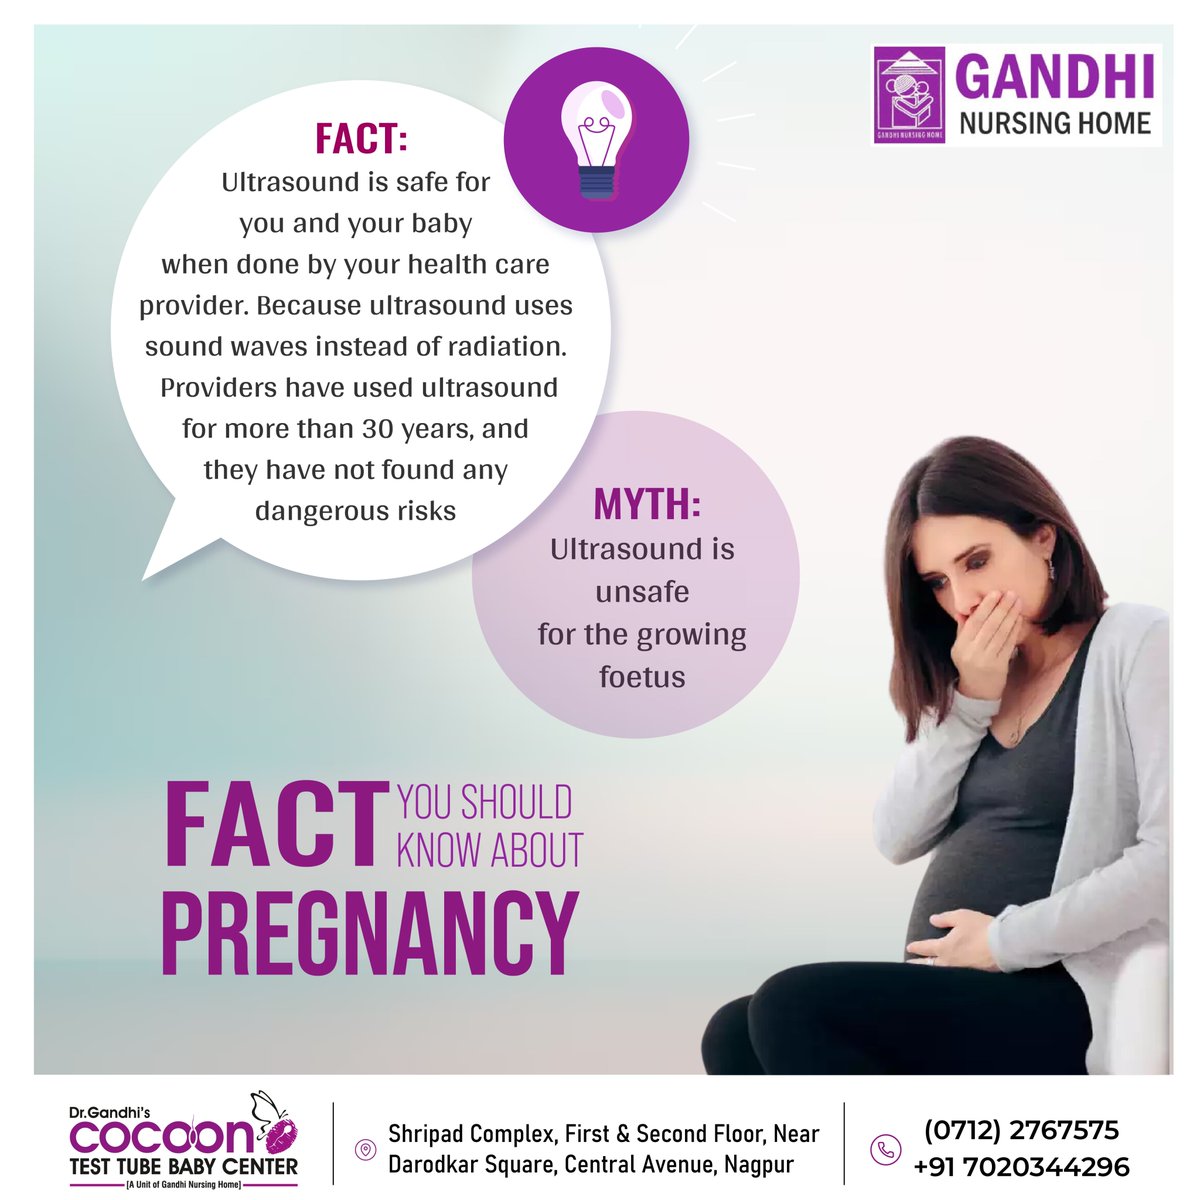 Fact you Should Know about Pregnancy

#PregnancyFacts
#PregnancyMyths
#HealthyPregnancy
#PregnancyNutrition
#PrenatalCare
#PregnancyComplications
#PregnancyExercise
#PregnancyWellness
#PregnancyTips
#BabyOnTheWay